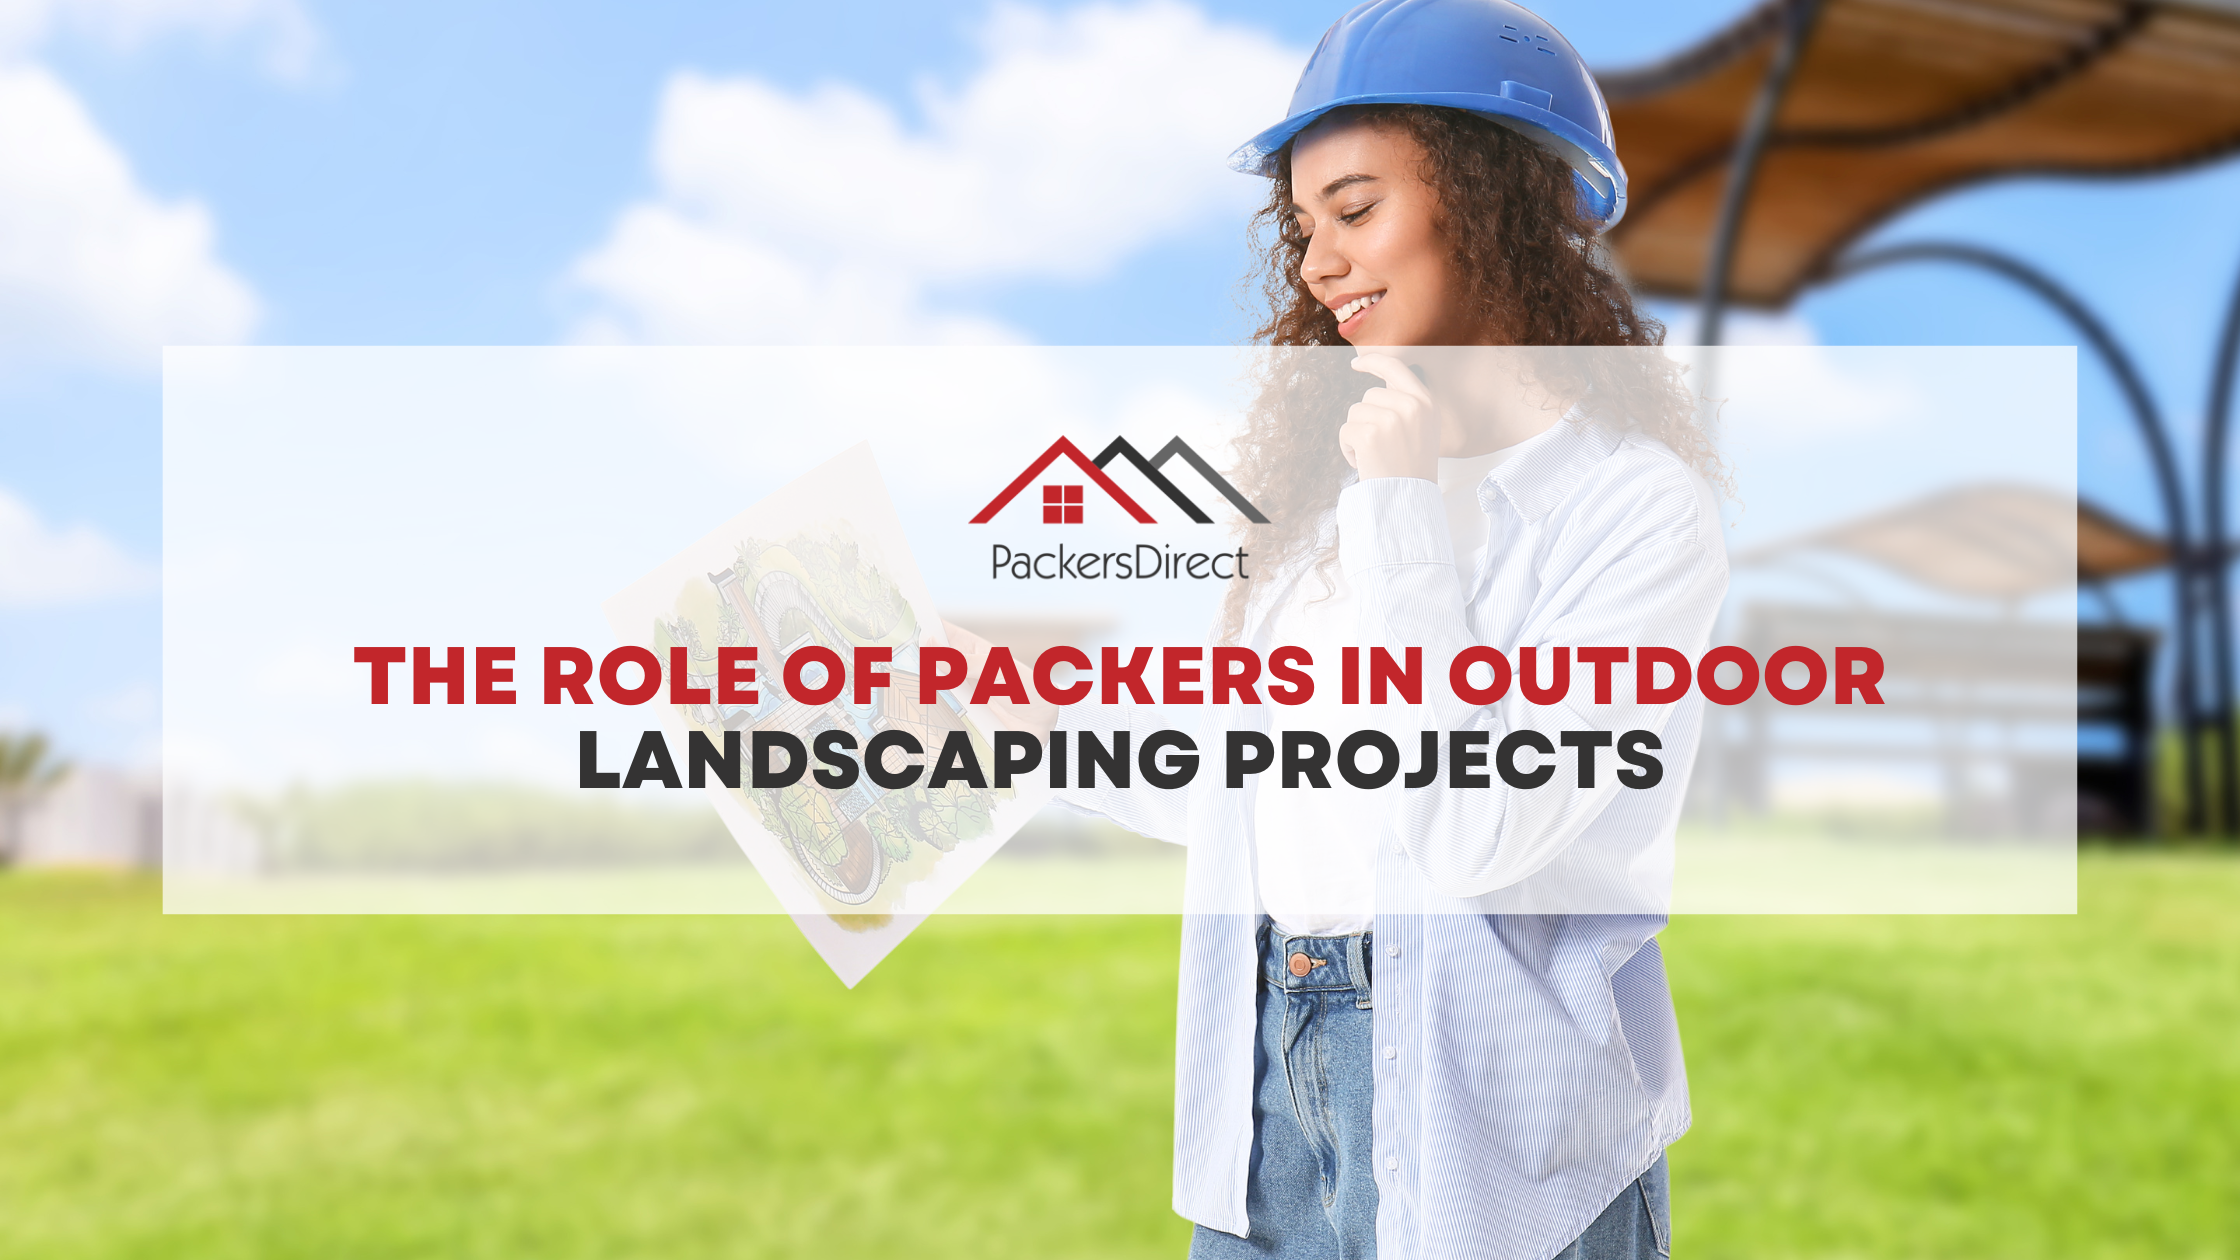 The Role of Packers in Outdoor Landscaping Projects